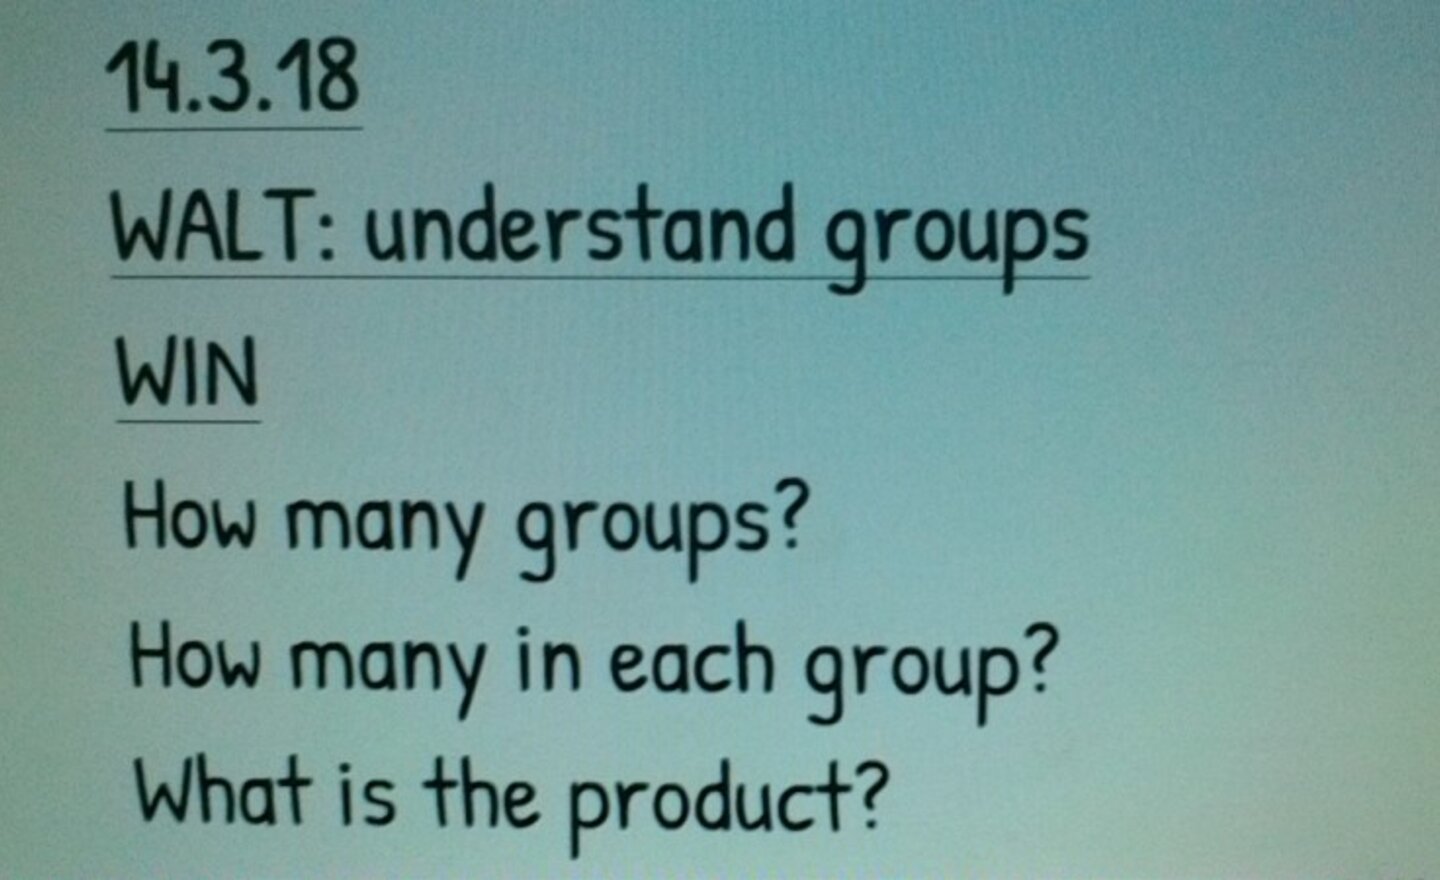 Image of We have been learning to understand groups and the product of the groups.